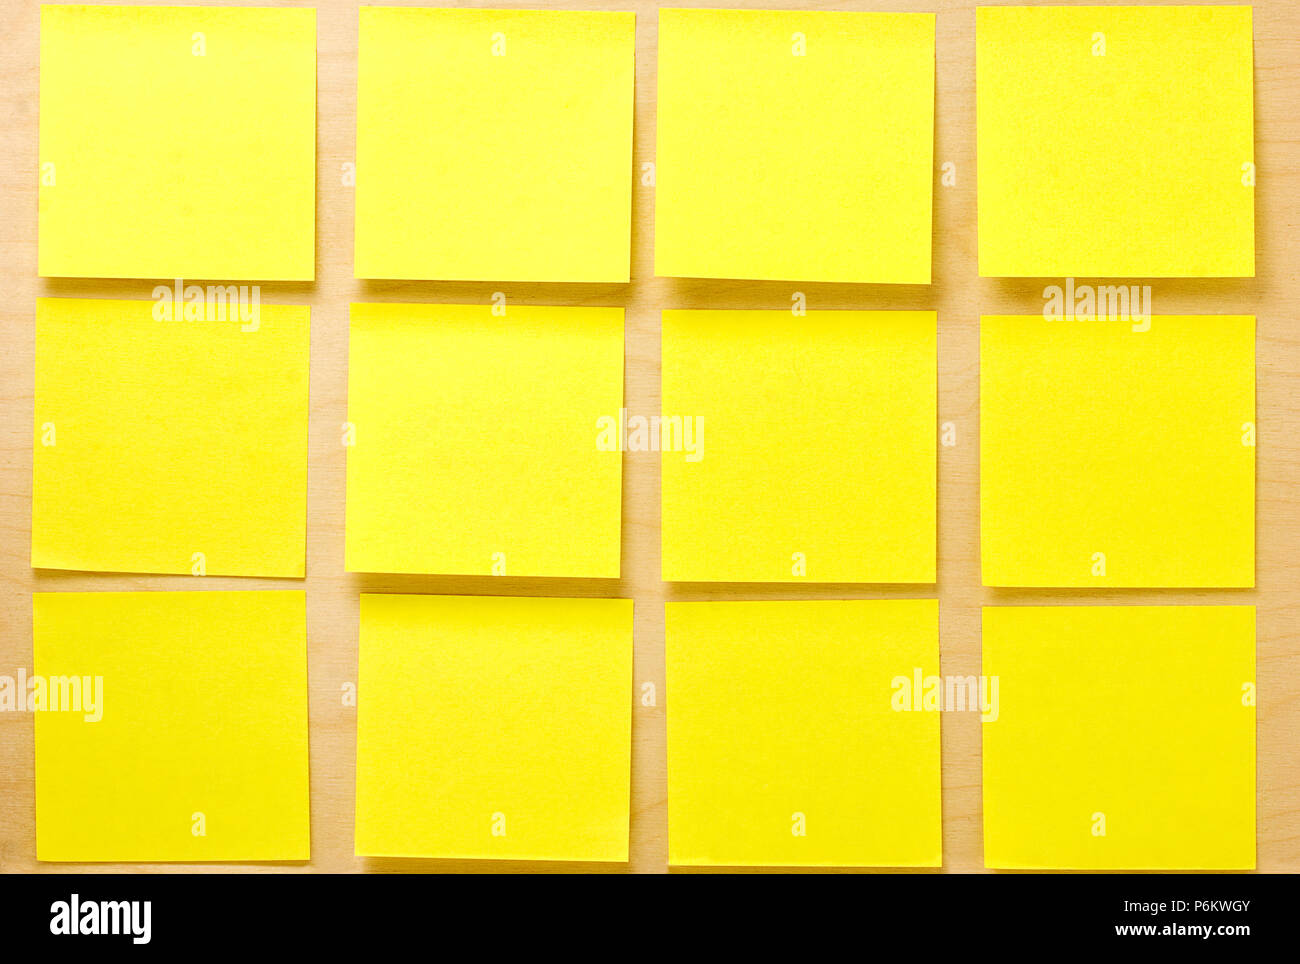 Blank well-ordered square yellow postit notes affixed on a wooden board Stock Photo